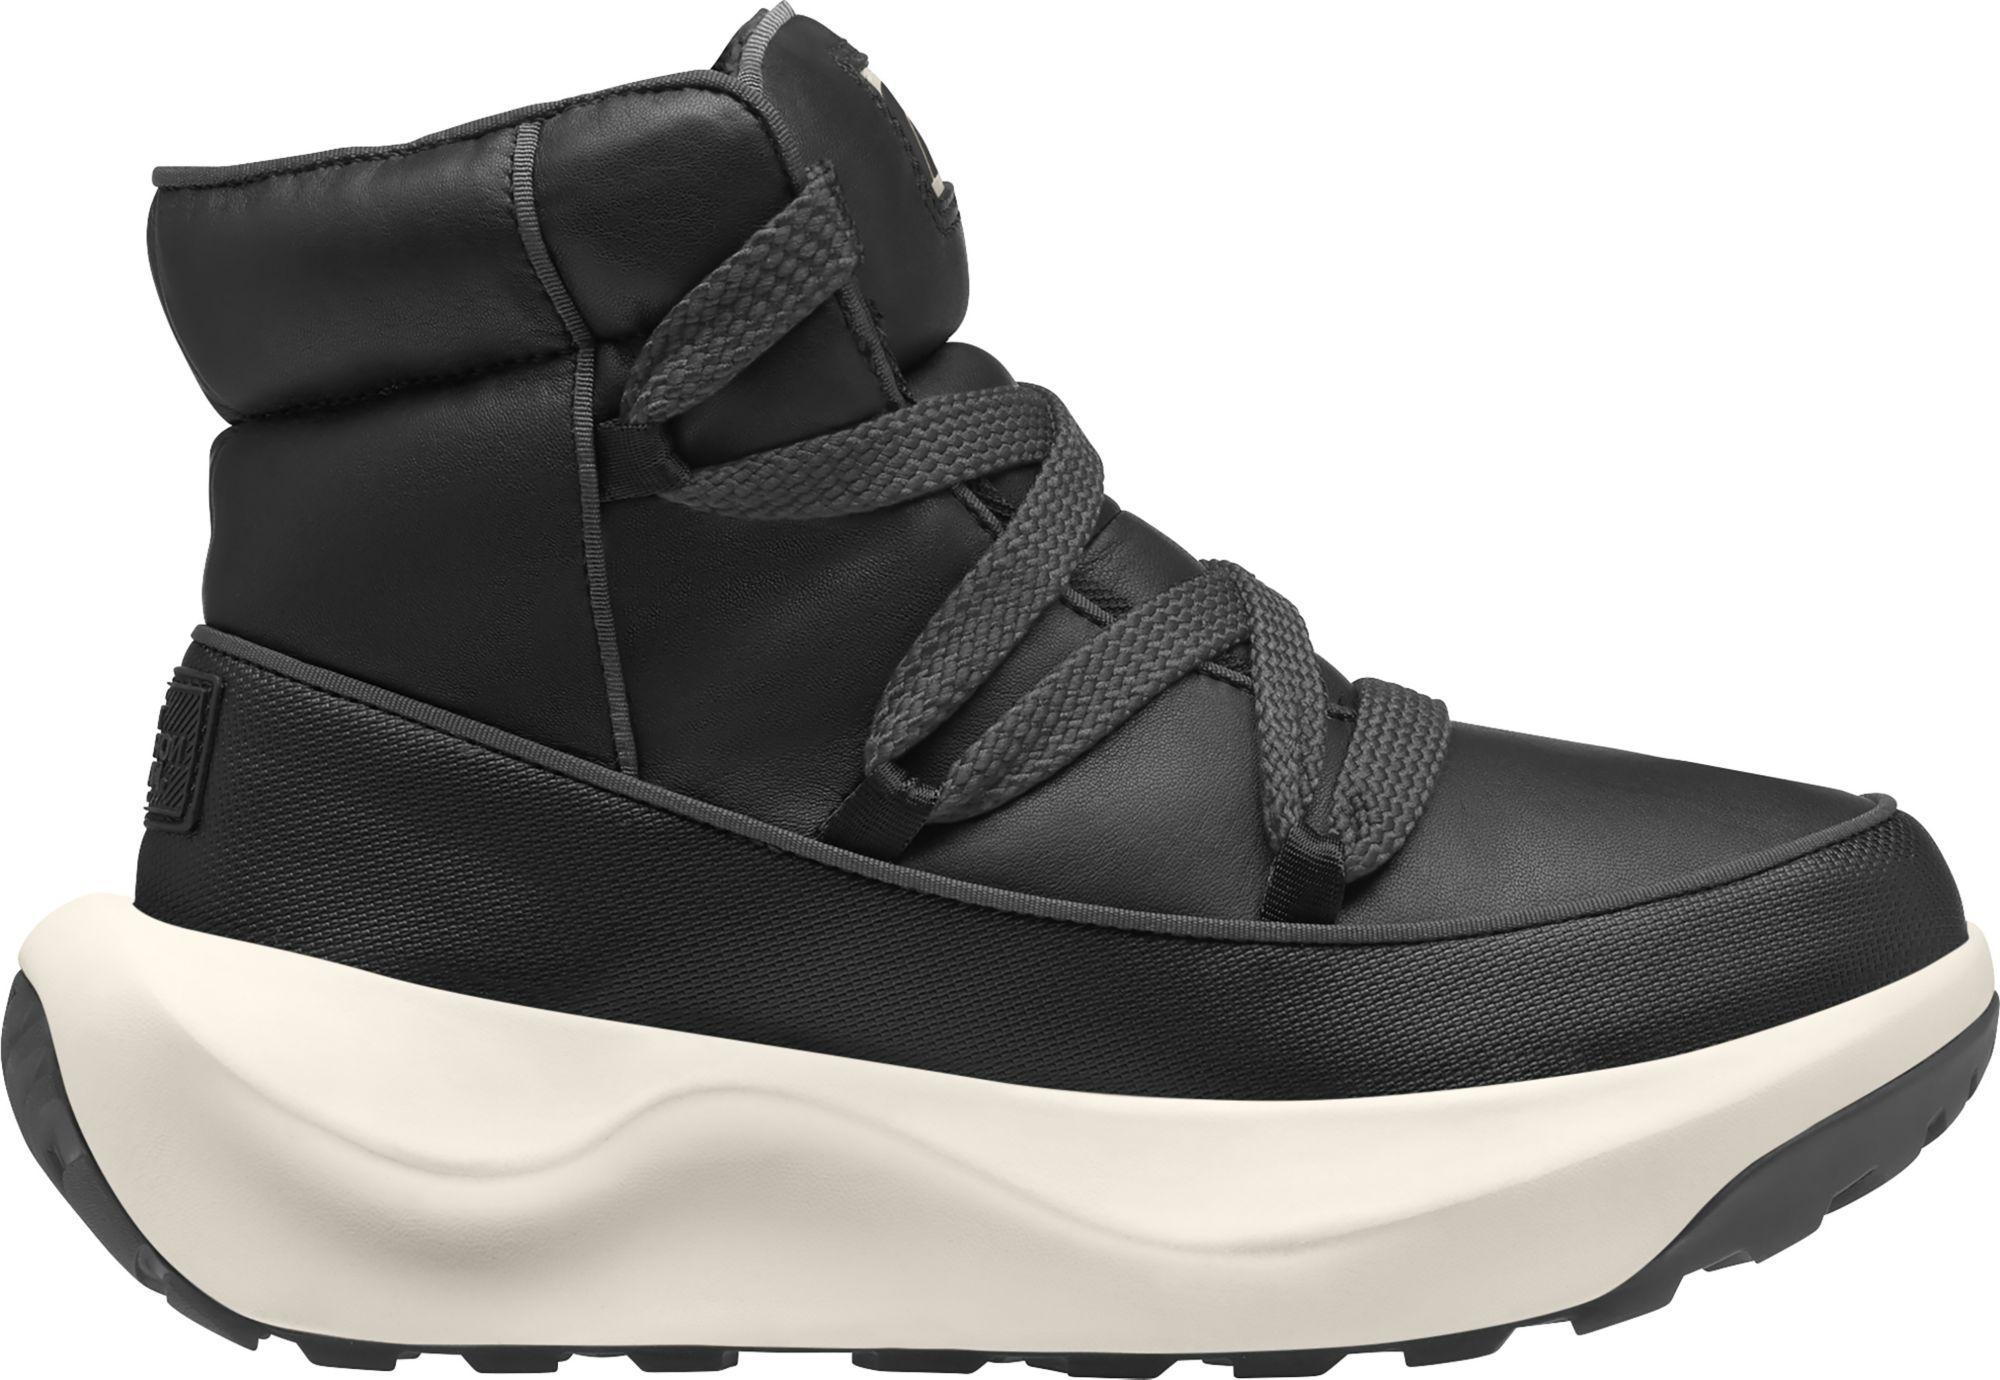 The North Face Womens Halseigh Thermoball Lace Waterproof Leather Platform Booties Product Image